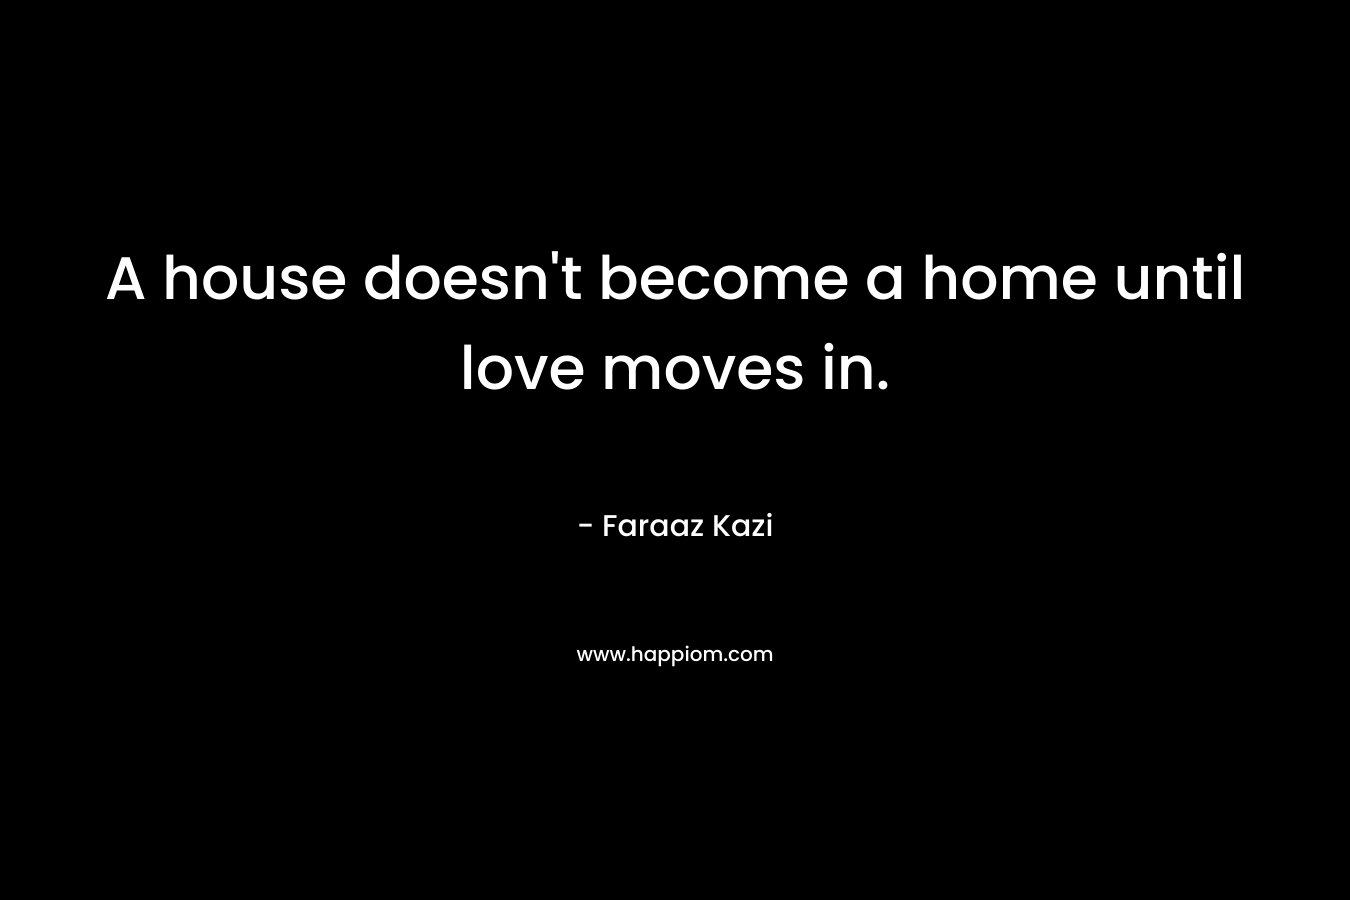 A house doesn't become a home until love moves in.